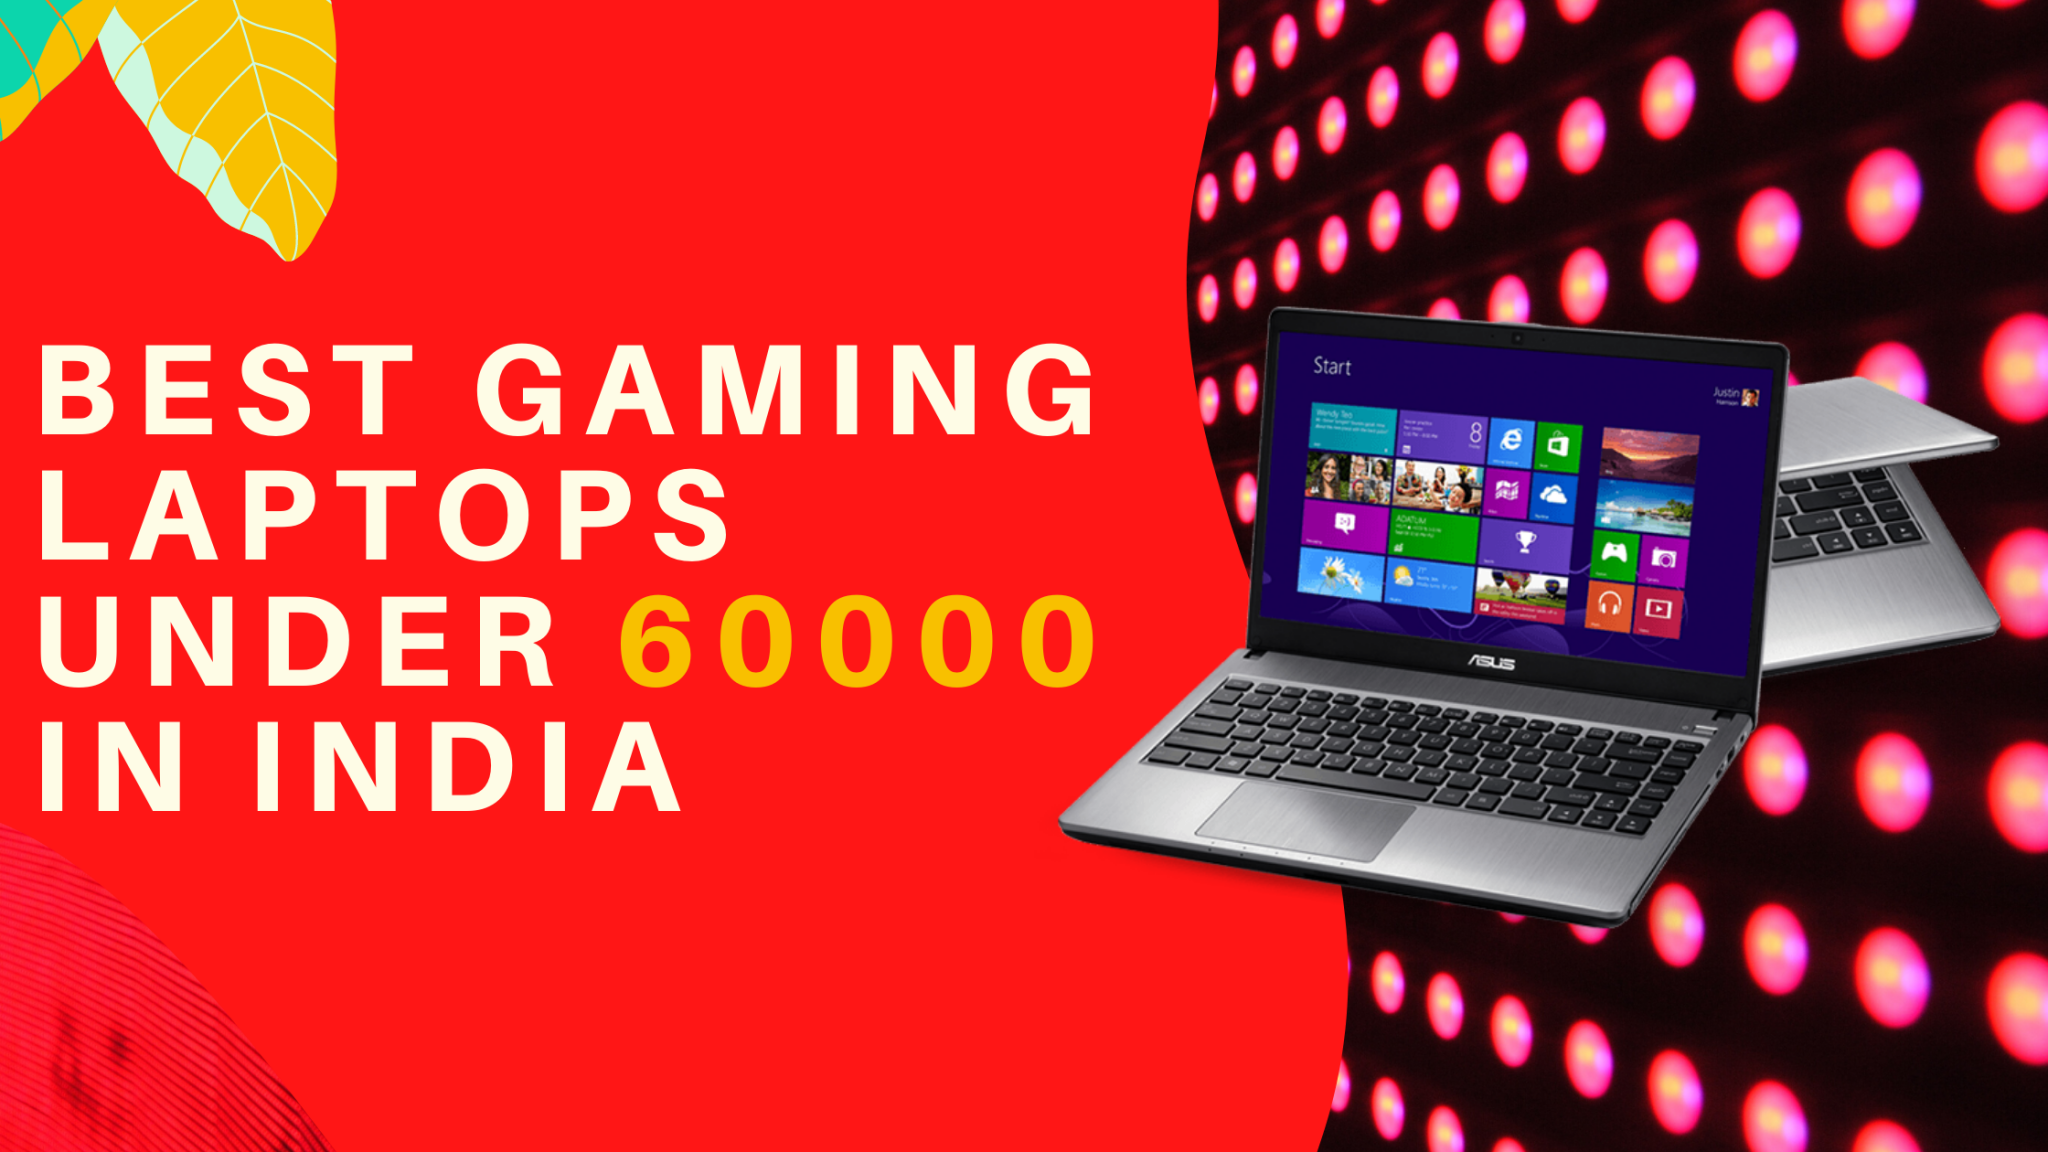 Best Gaming Laptops Under 60000 In India